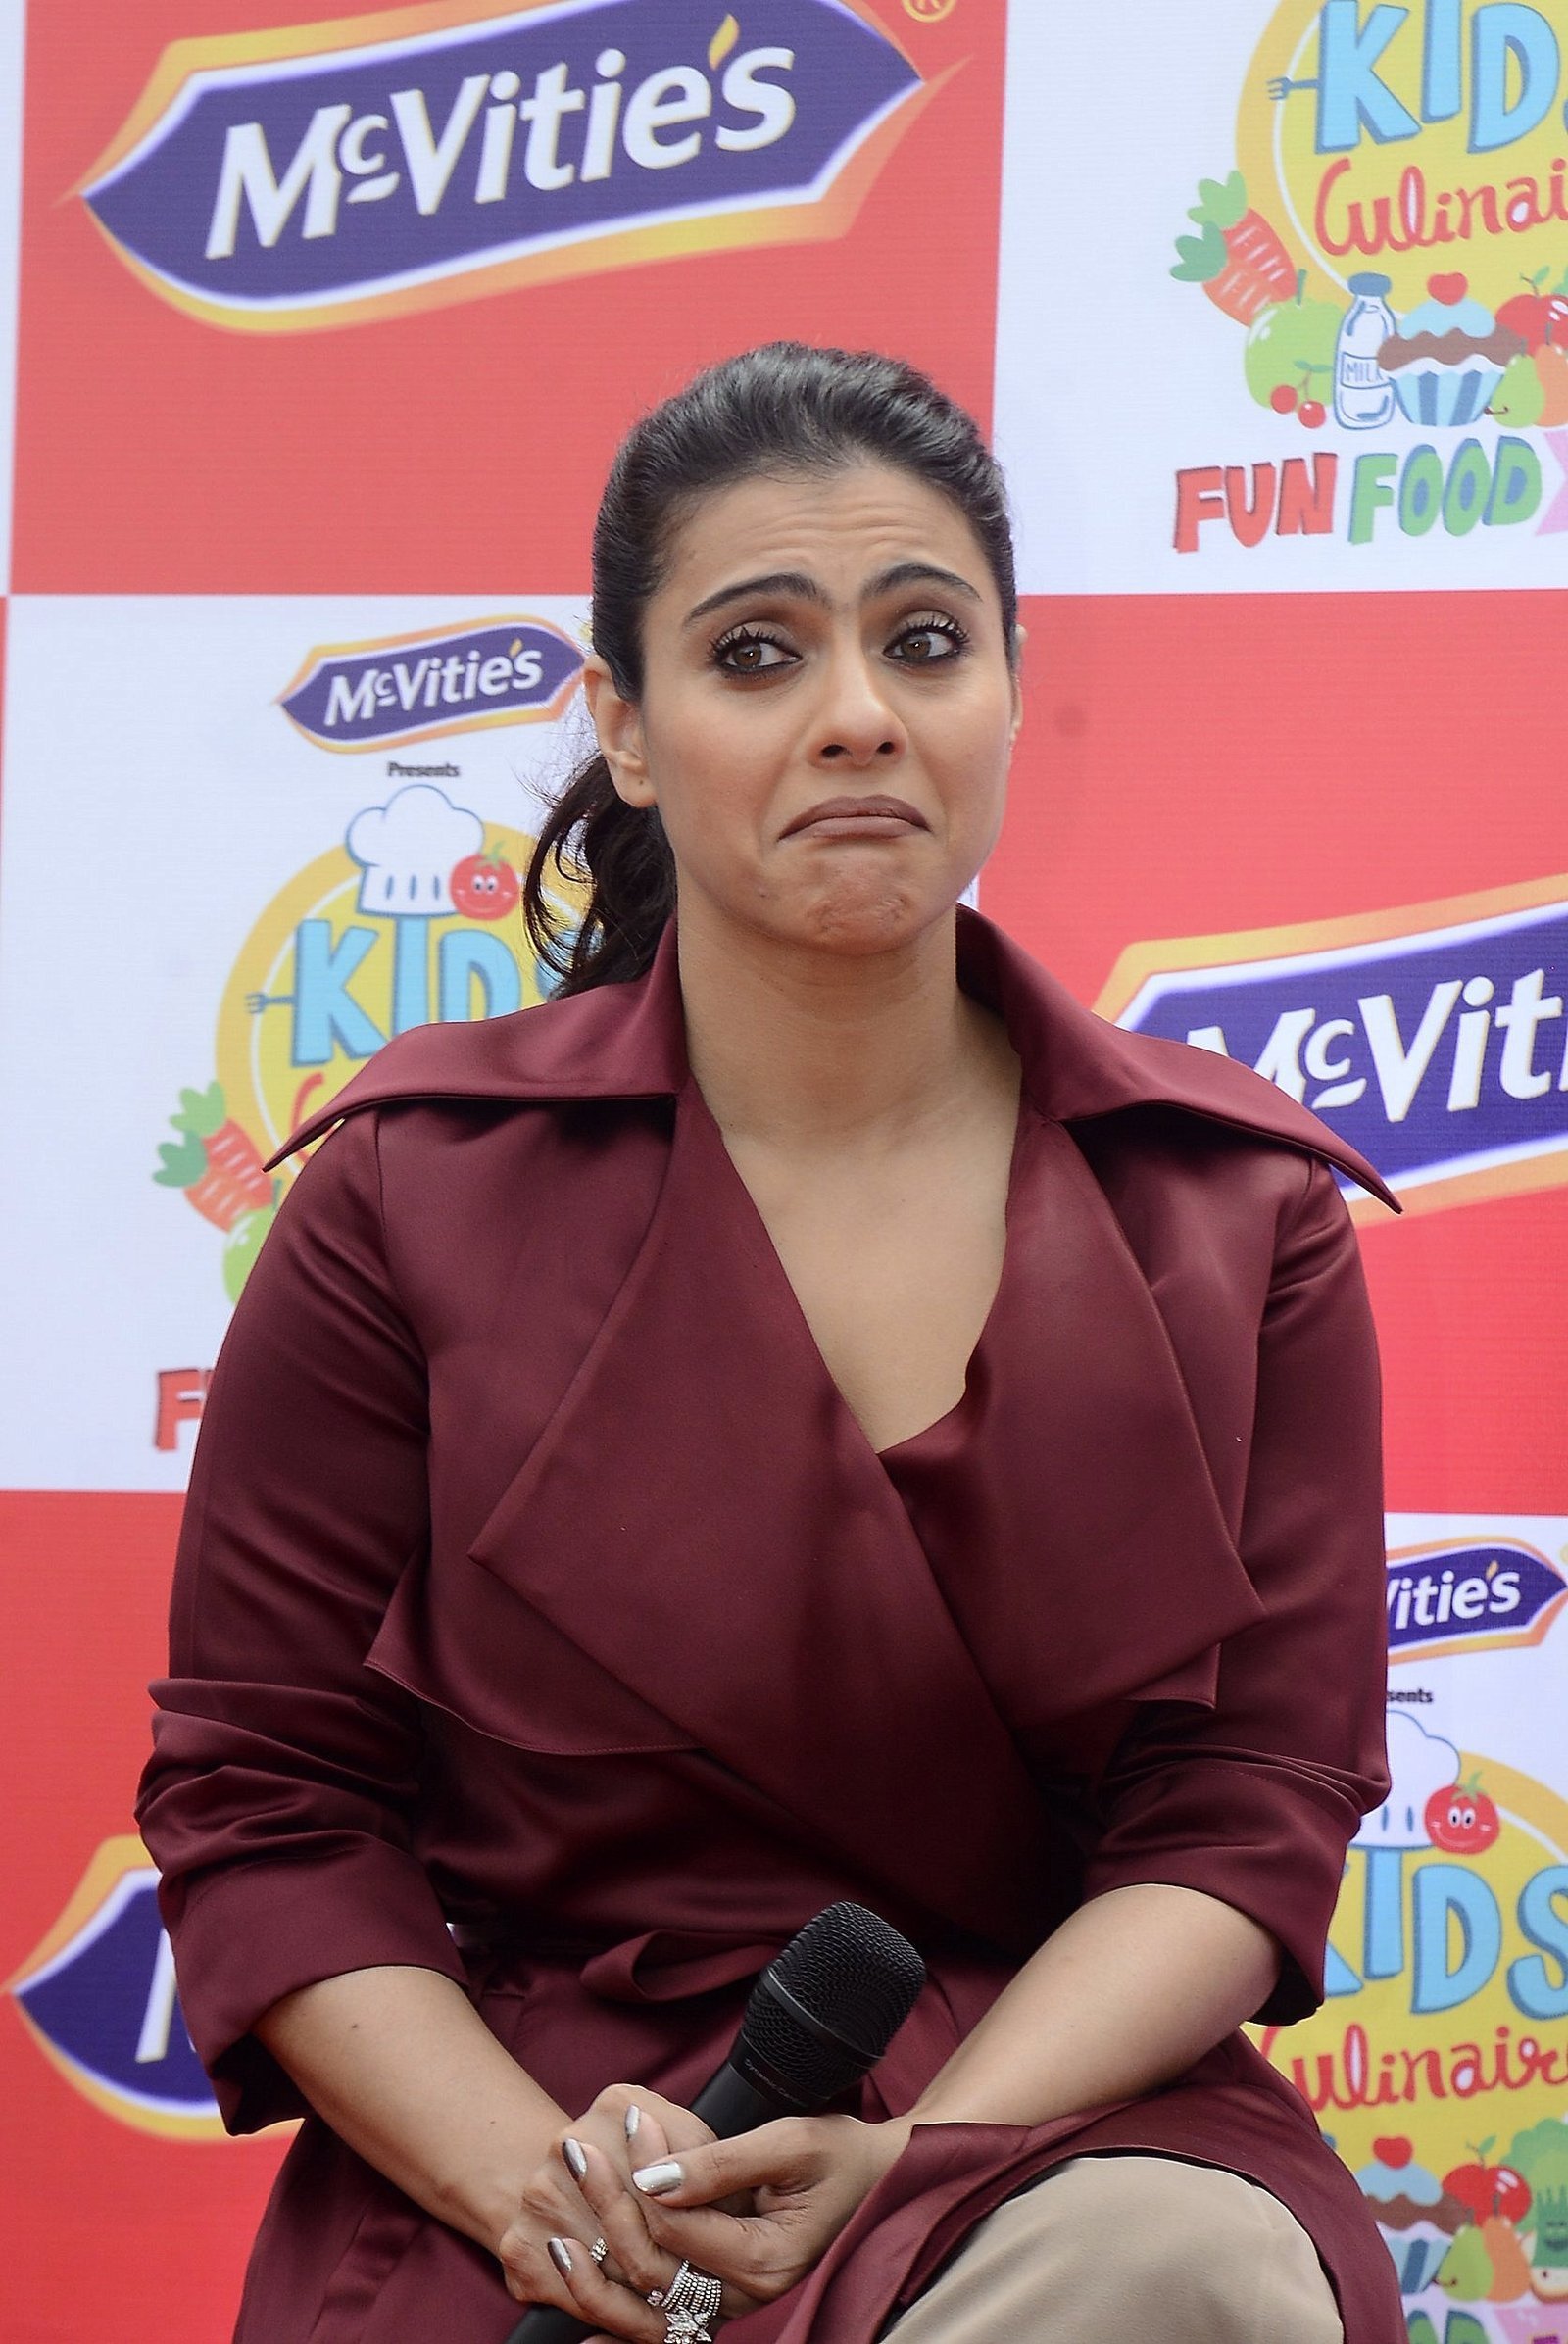 Kajol during the 4th edition of McVities Kids Culinarie Images | Picture 1490990